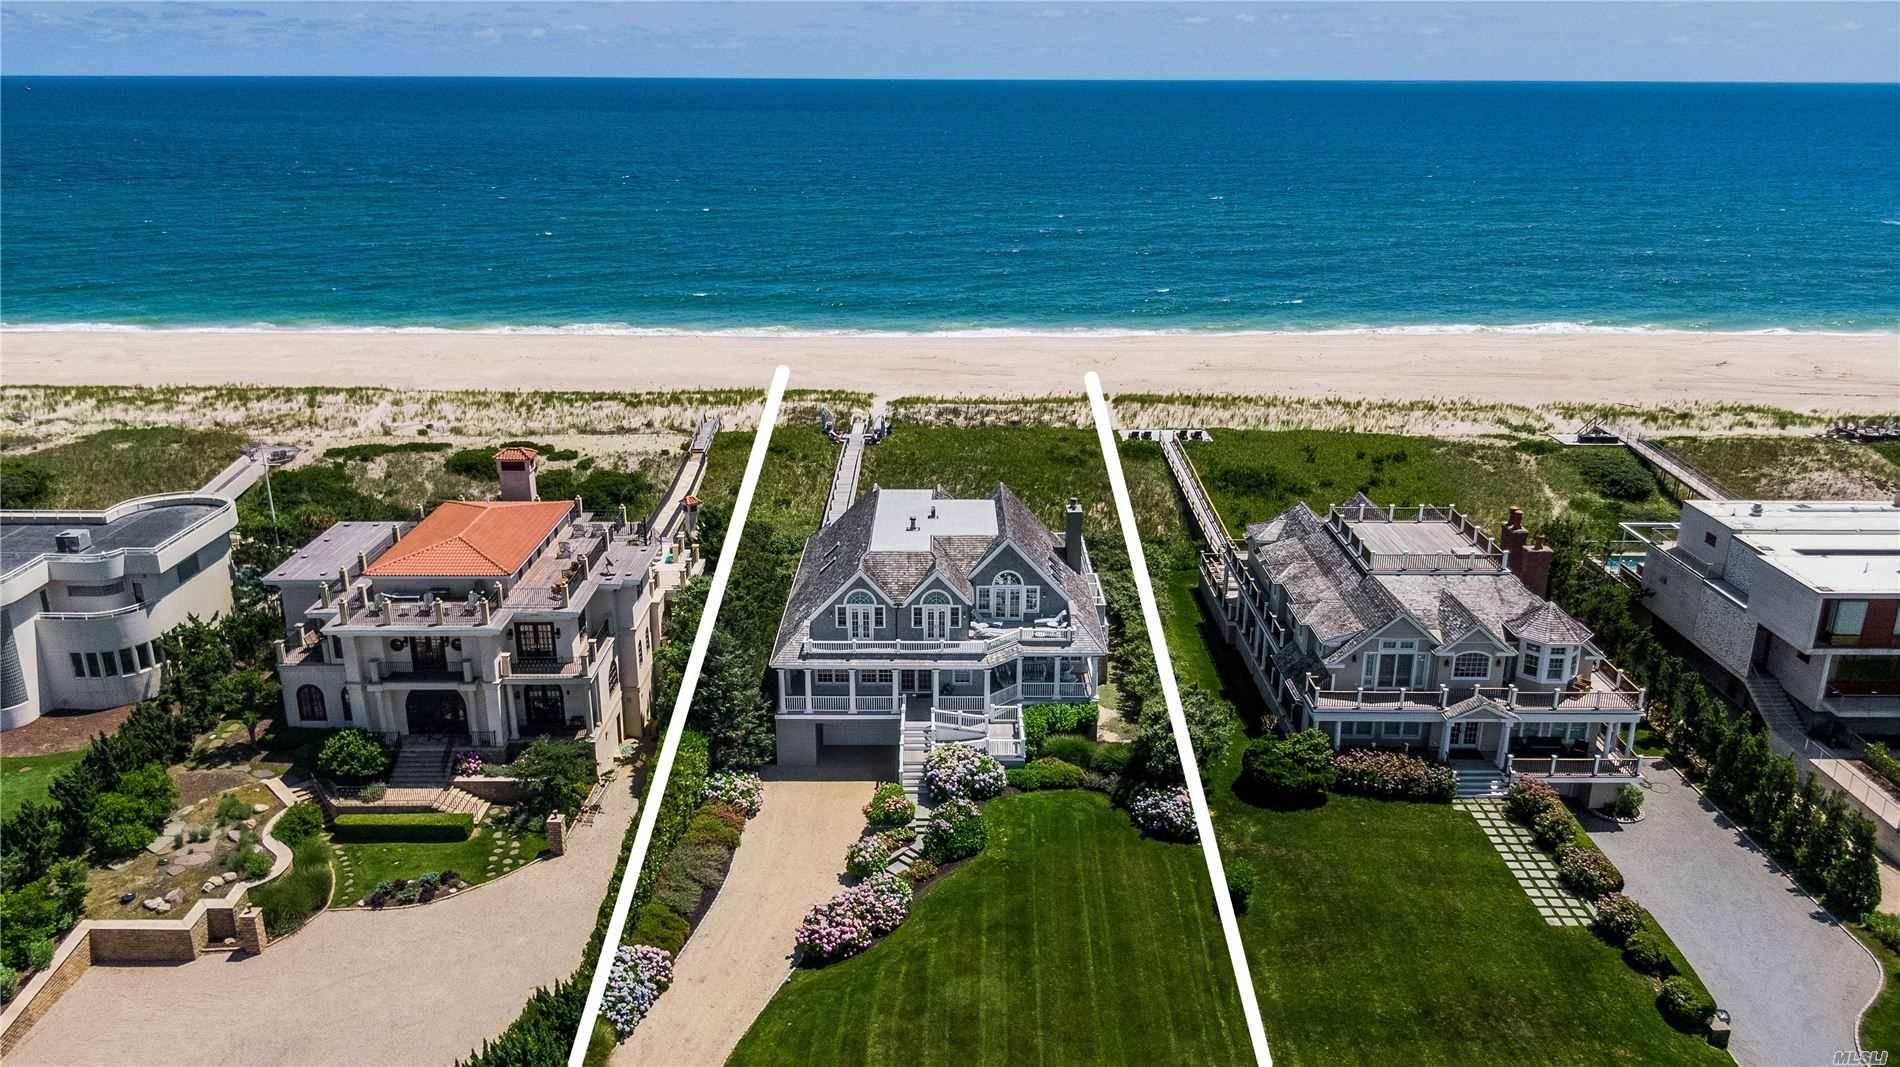 This Extraordinary Oceanfront Home Has It All.